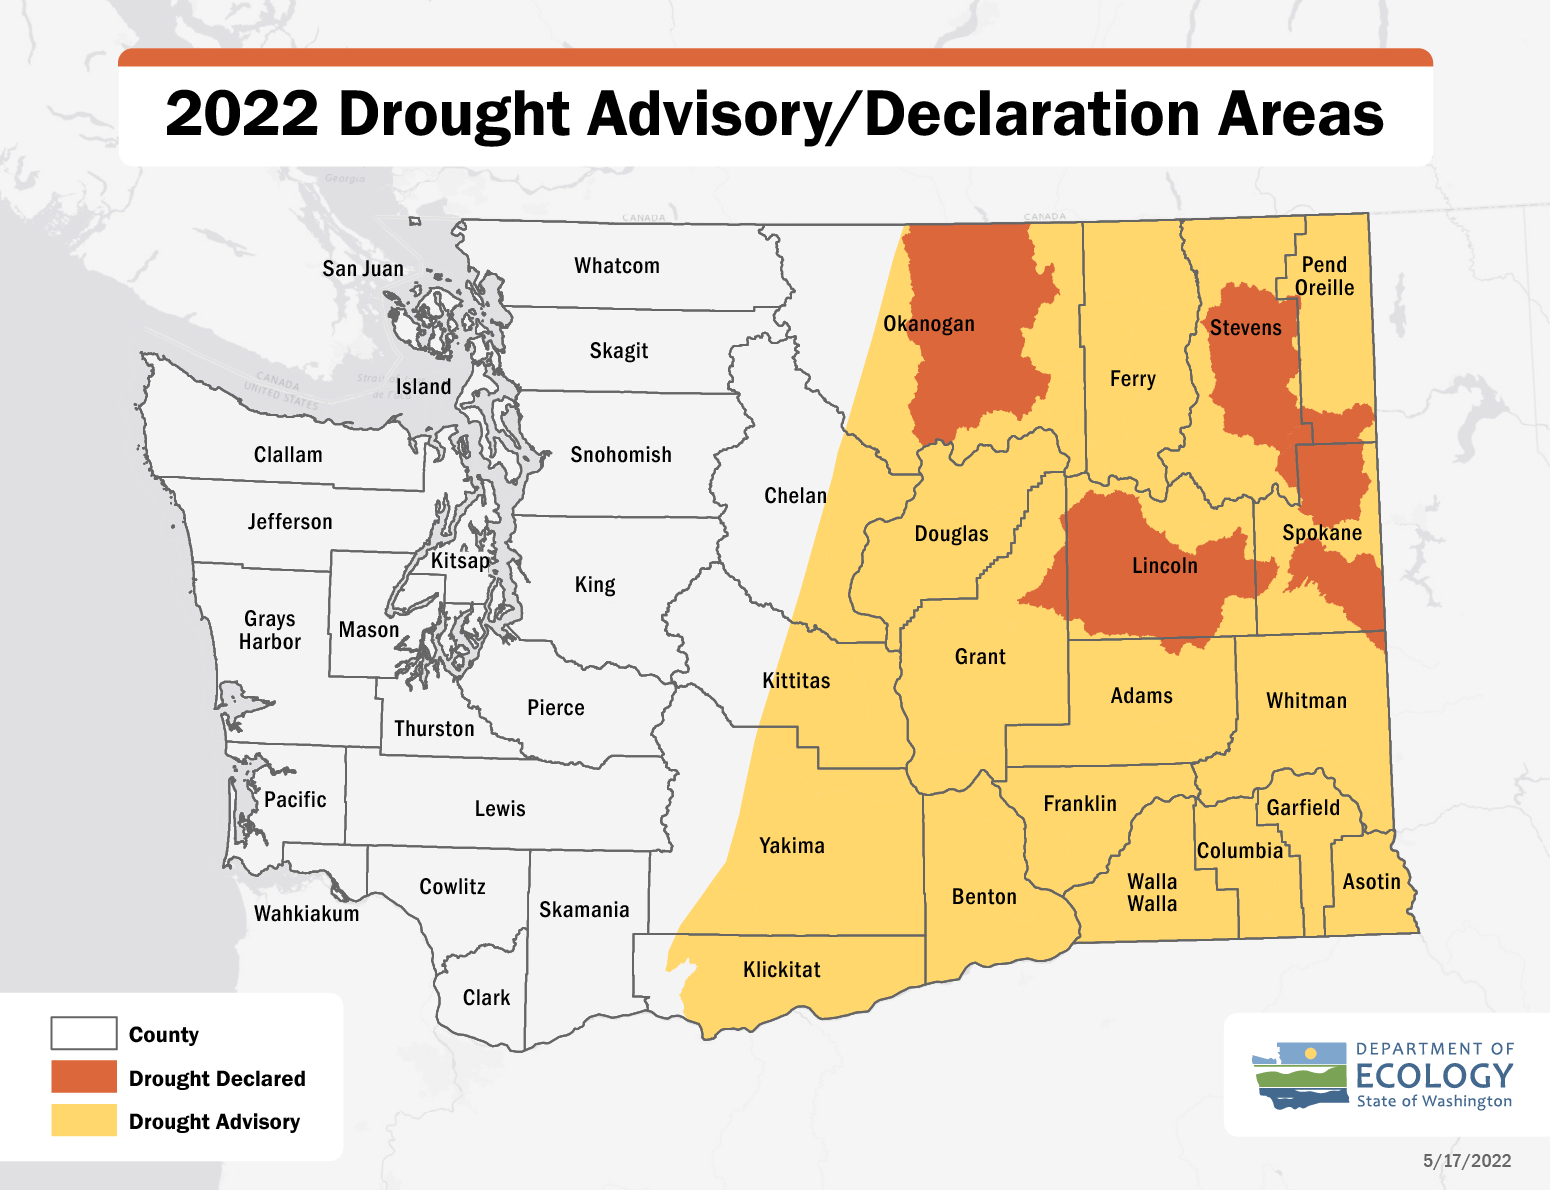 Map of Washington indicating five watersheds spanning parts of Spokane, Lincoln, Grant, Adams, Whitman, Stevens, Okanogan and Pend Oreille counties remain in drought emergency status. 